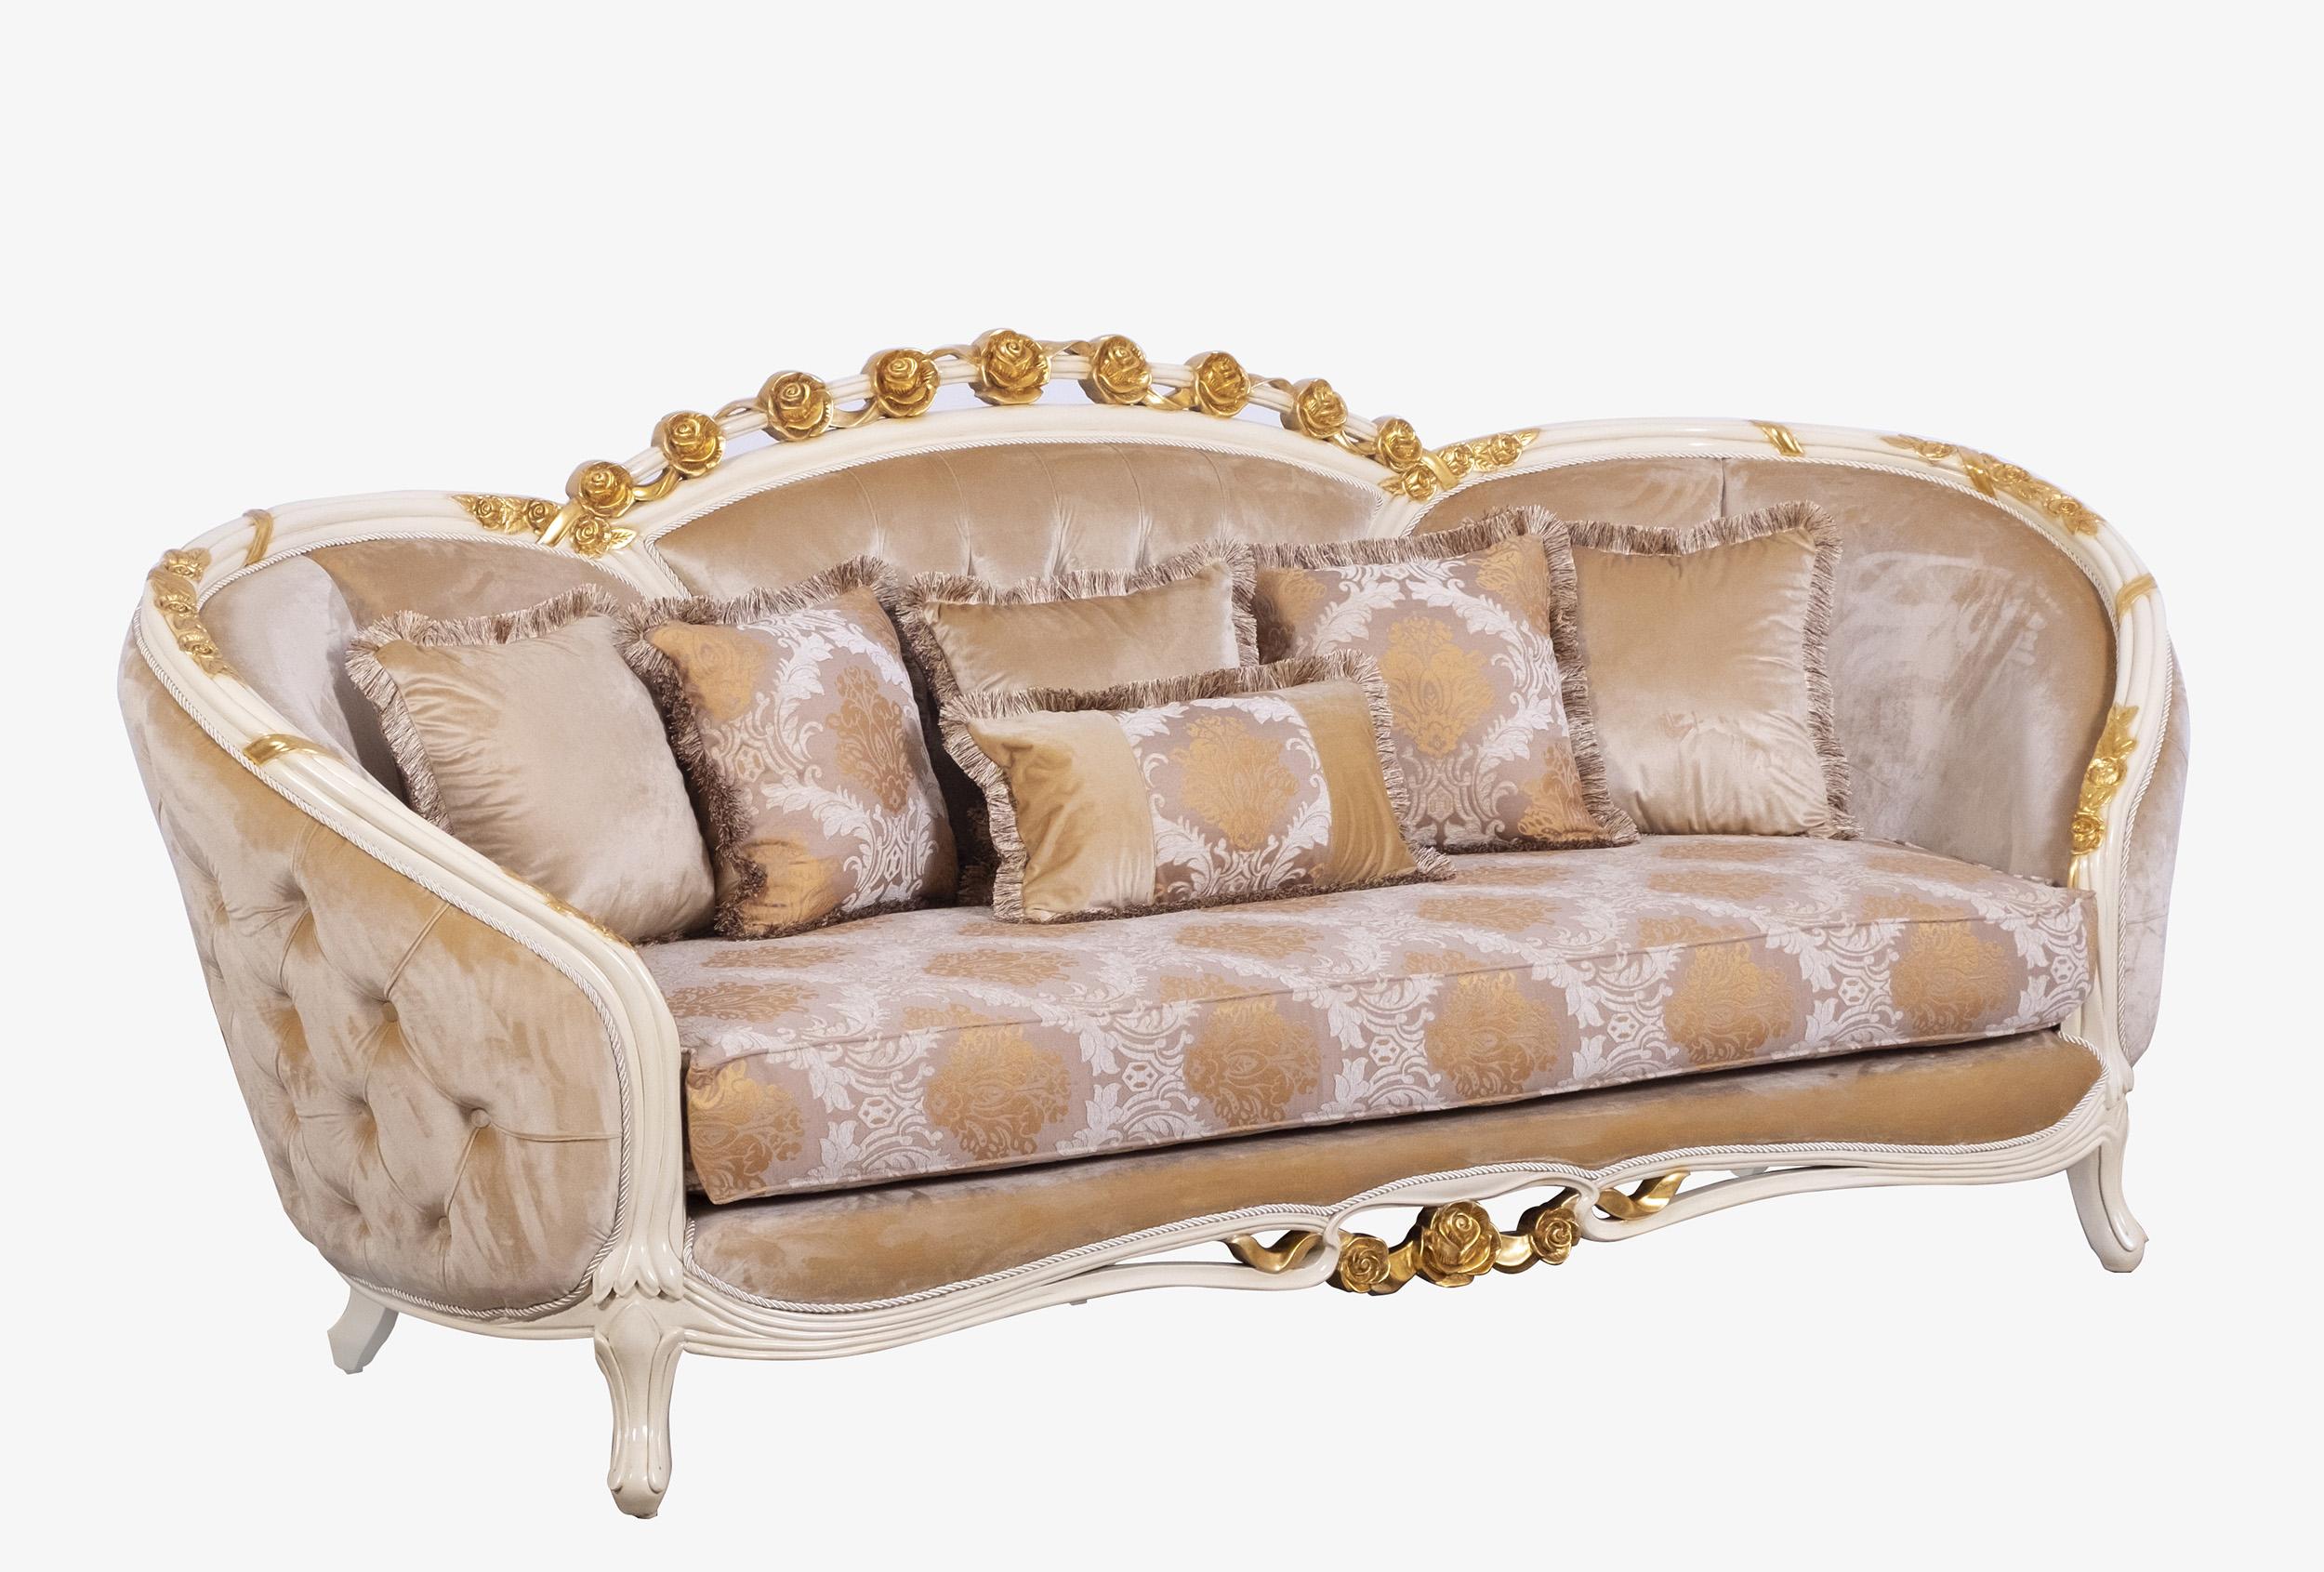 Classic, Traditional Sofa VALENTINE 45010-S in Gold, Beige Fabric